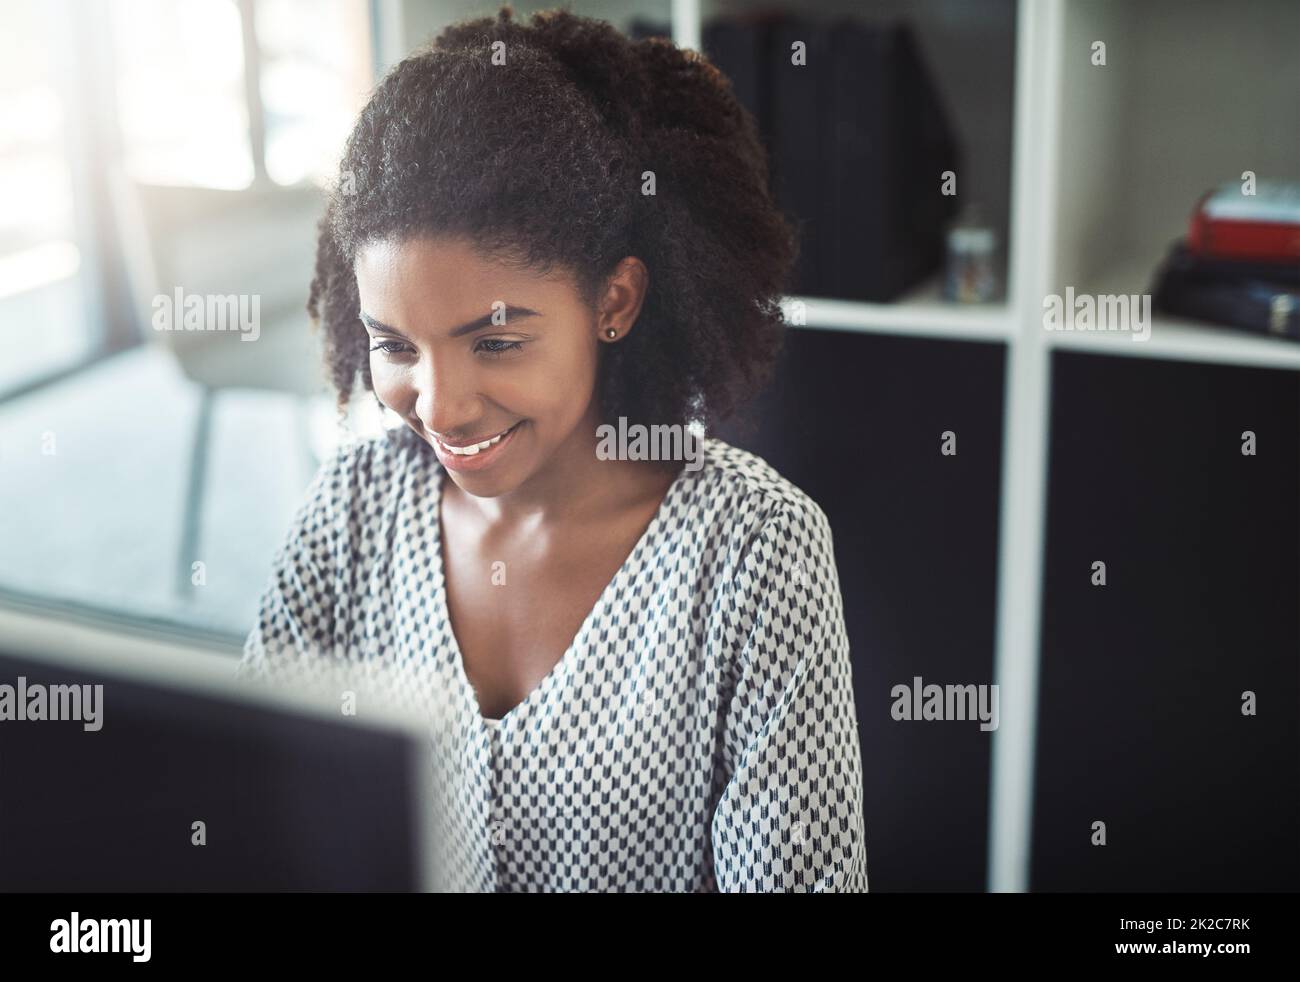 She has a killer work ethic. Cropped shot of a young businesswoman working on her computer at her desk. Stock Photo